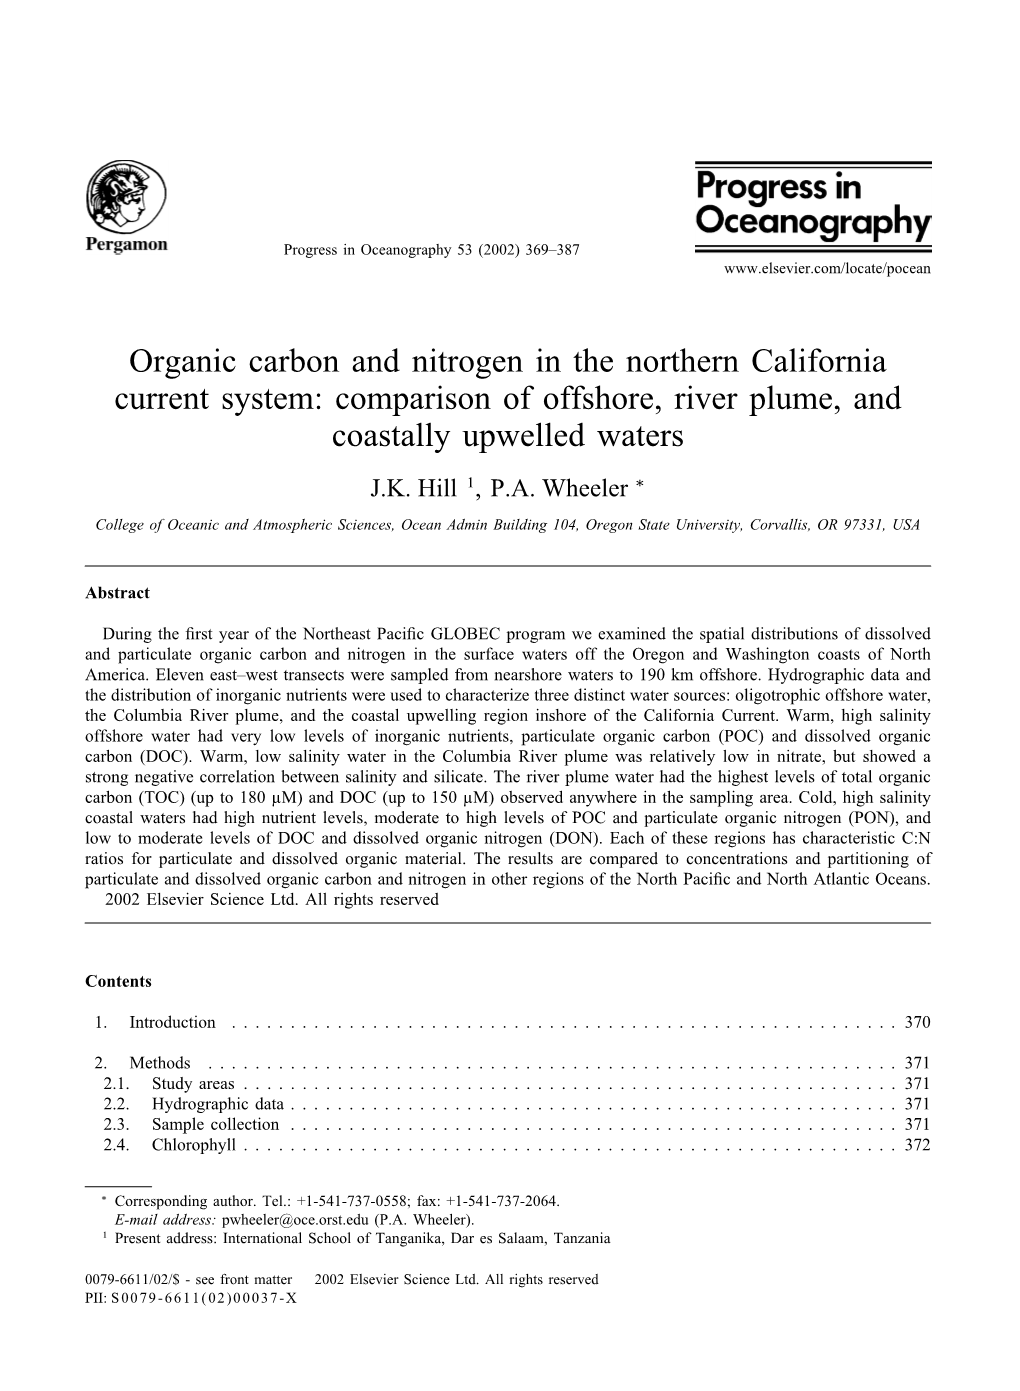 Organic Carbon and Nitrogen in the Northern California Current System: Comparison of Offshore, River Plume, and Coastally Upwelled Waters J.K